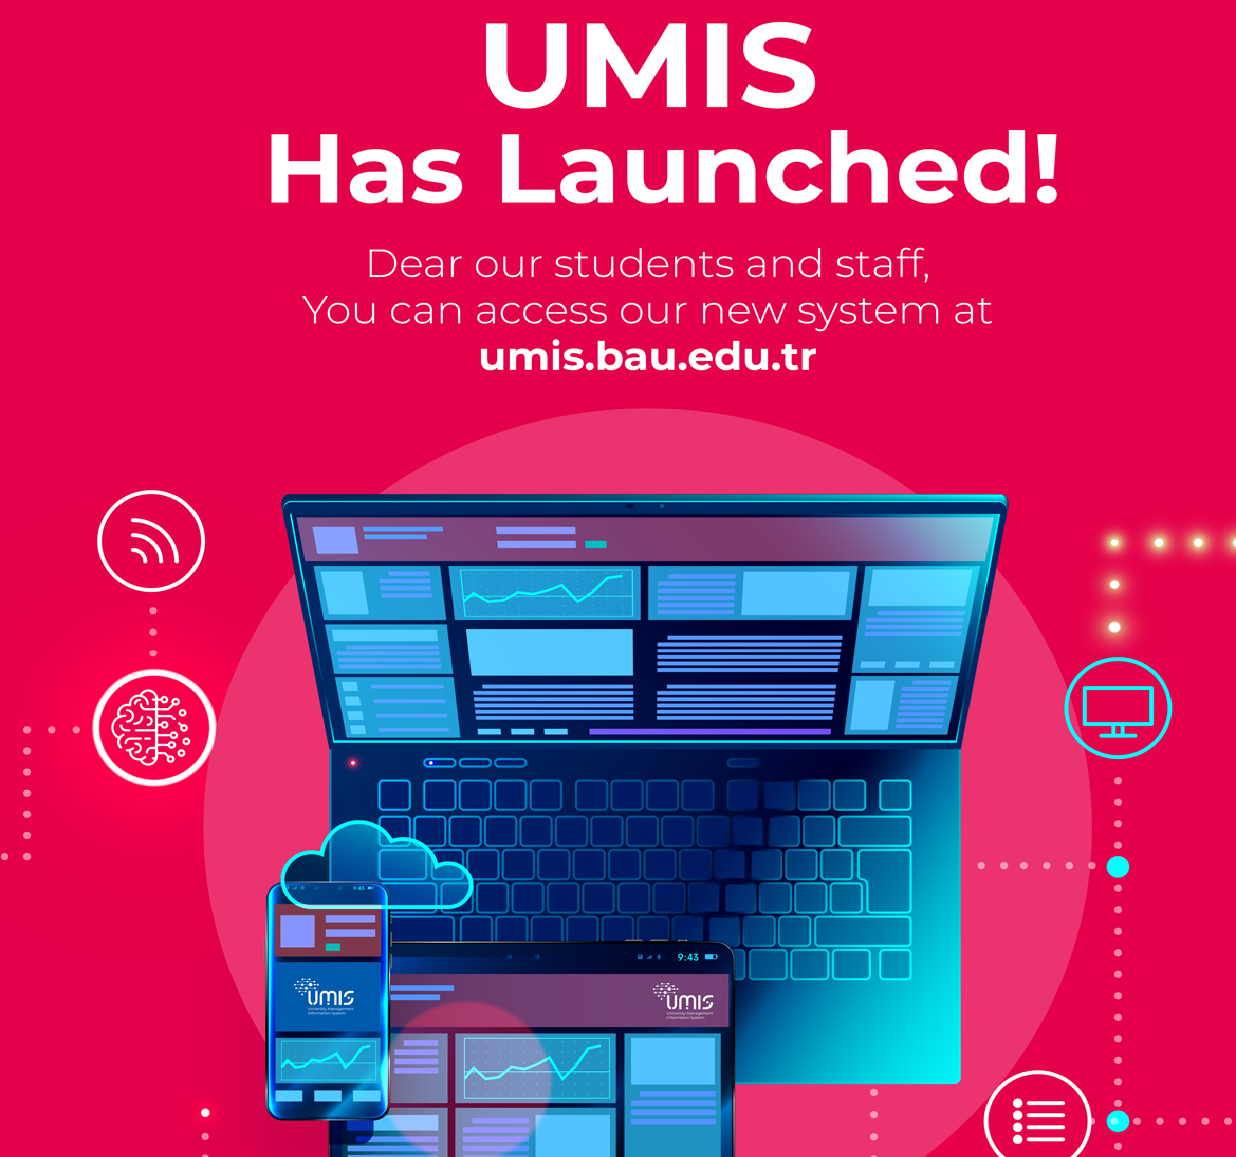 UMIS has launched!